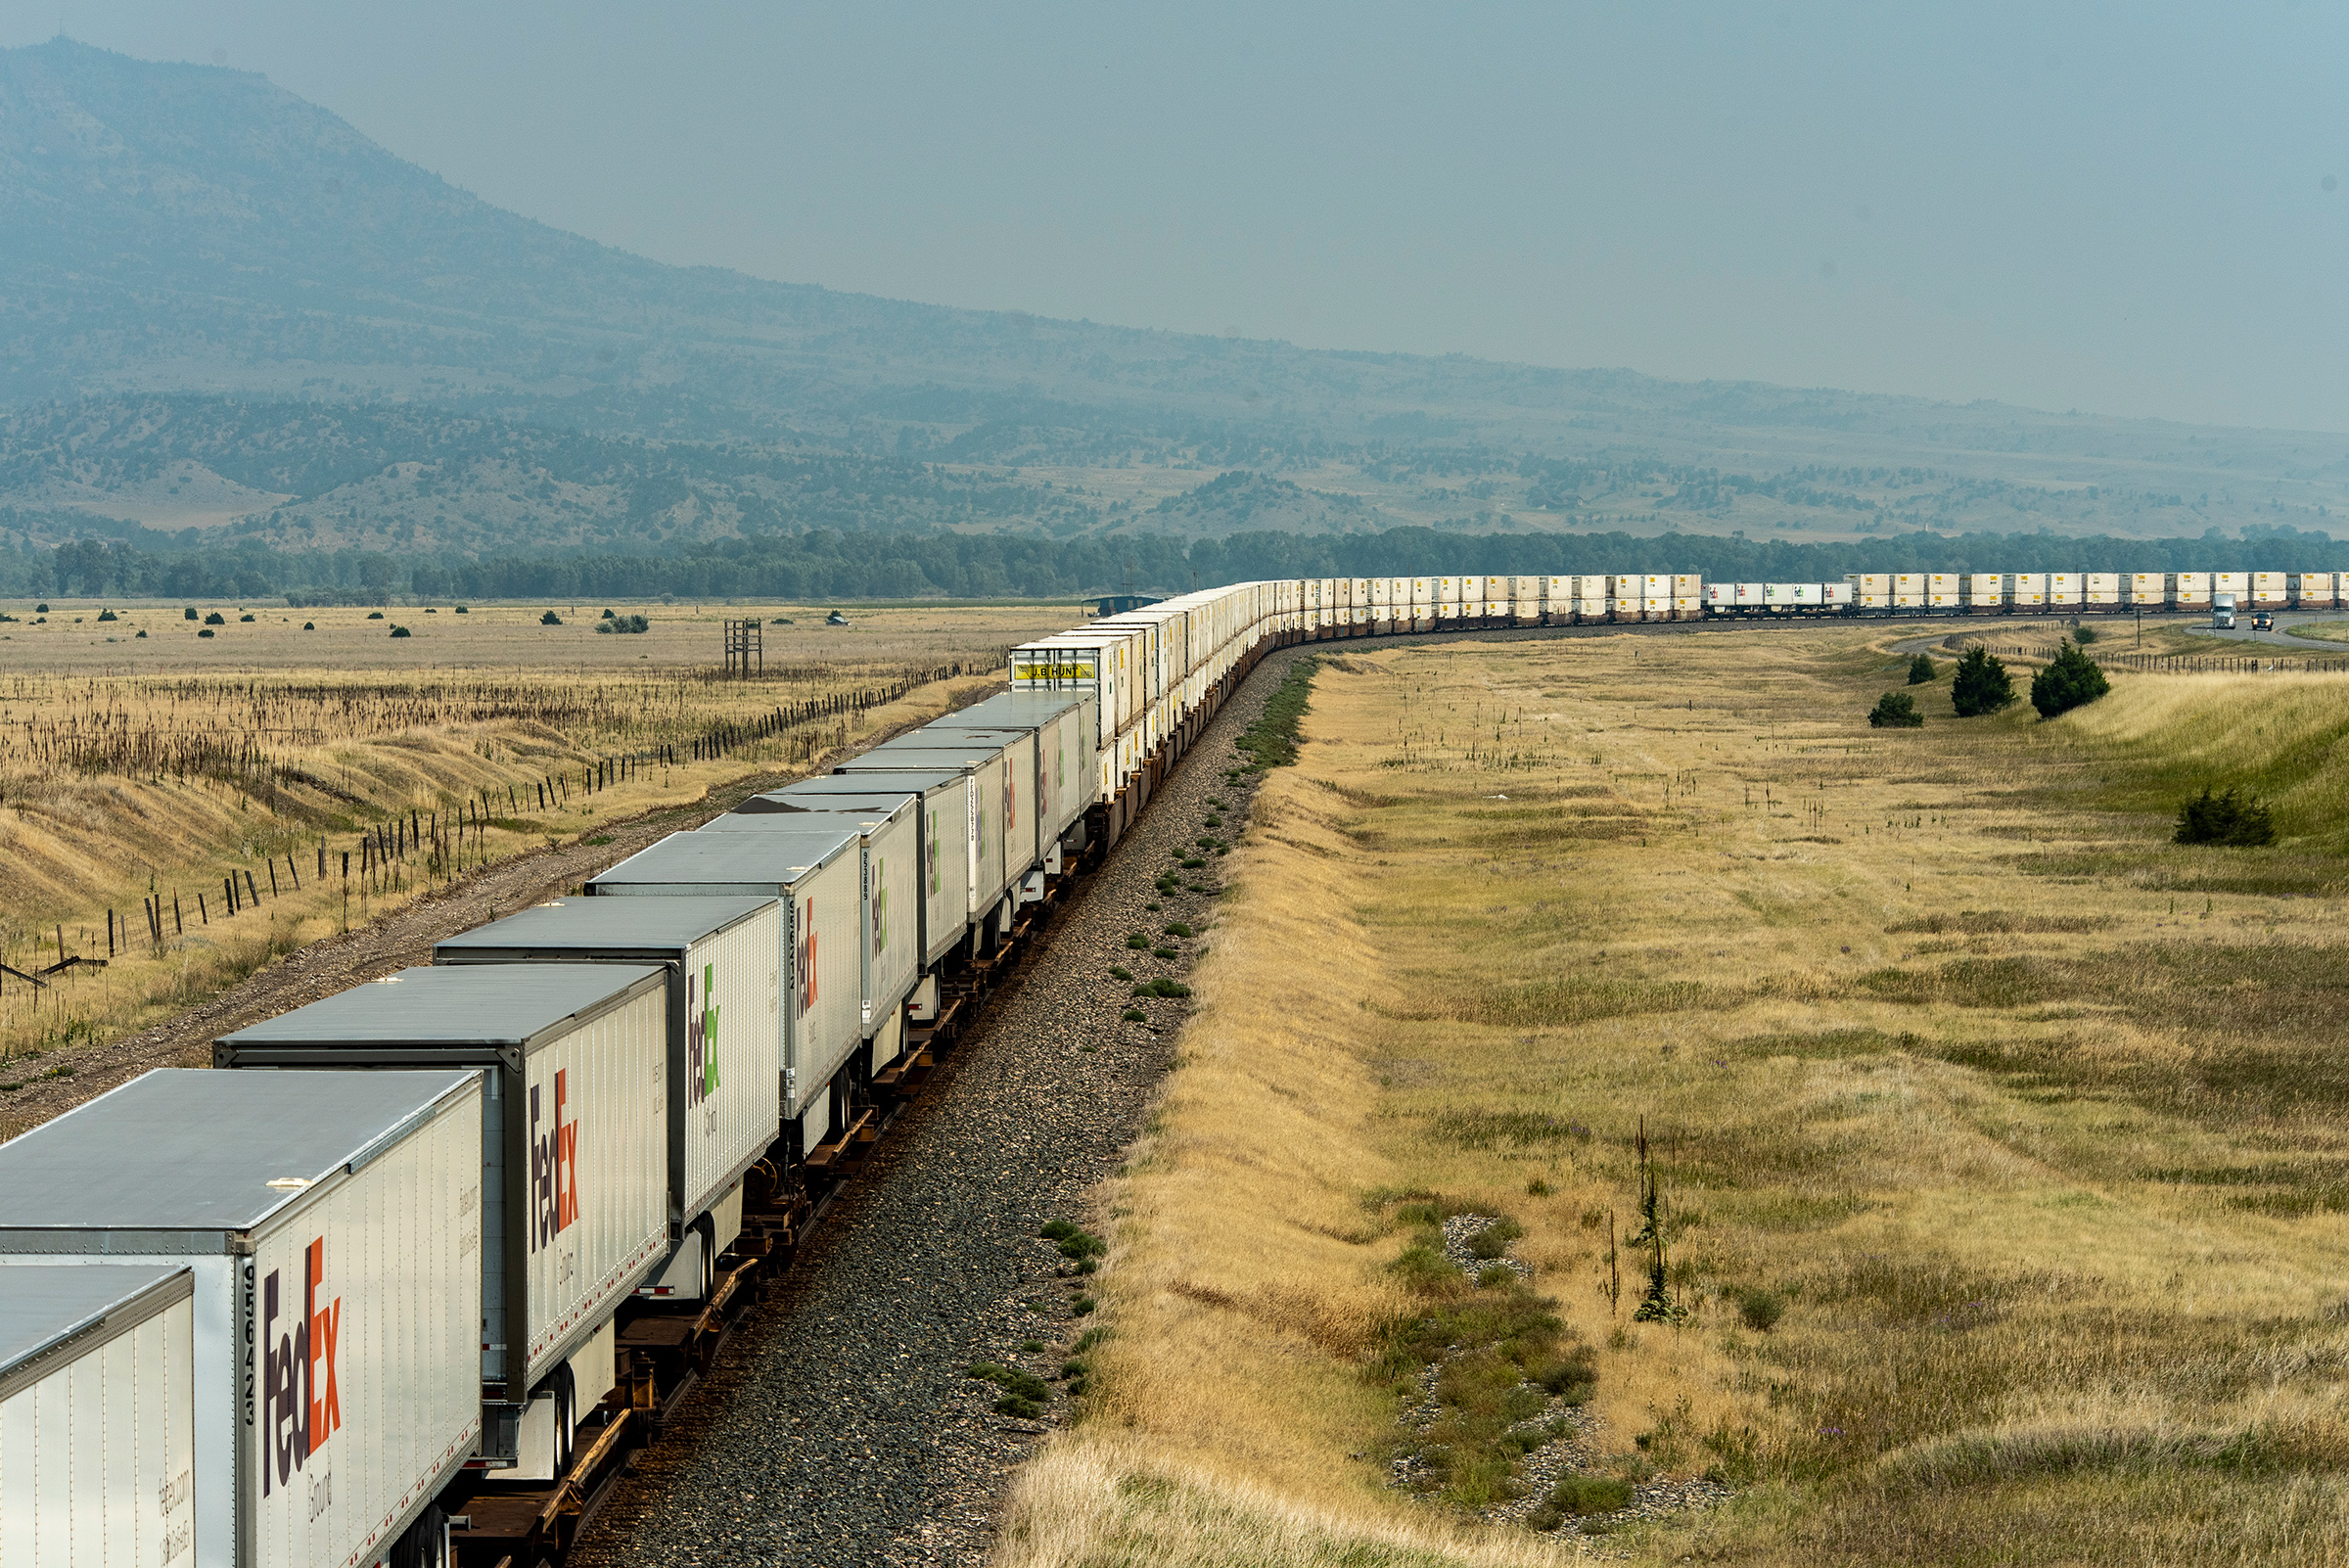 A BNSF freight train with 76 container cars and FedEx freight trailers travels from Seattle to points east on August 23, 2021 in Livingston, Mont. (William Campbell—Getty Images)